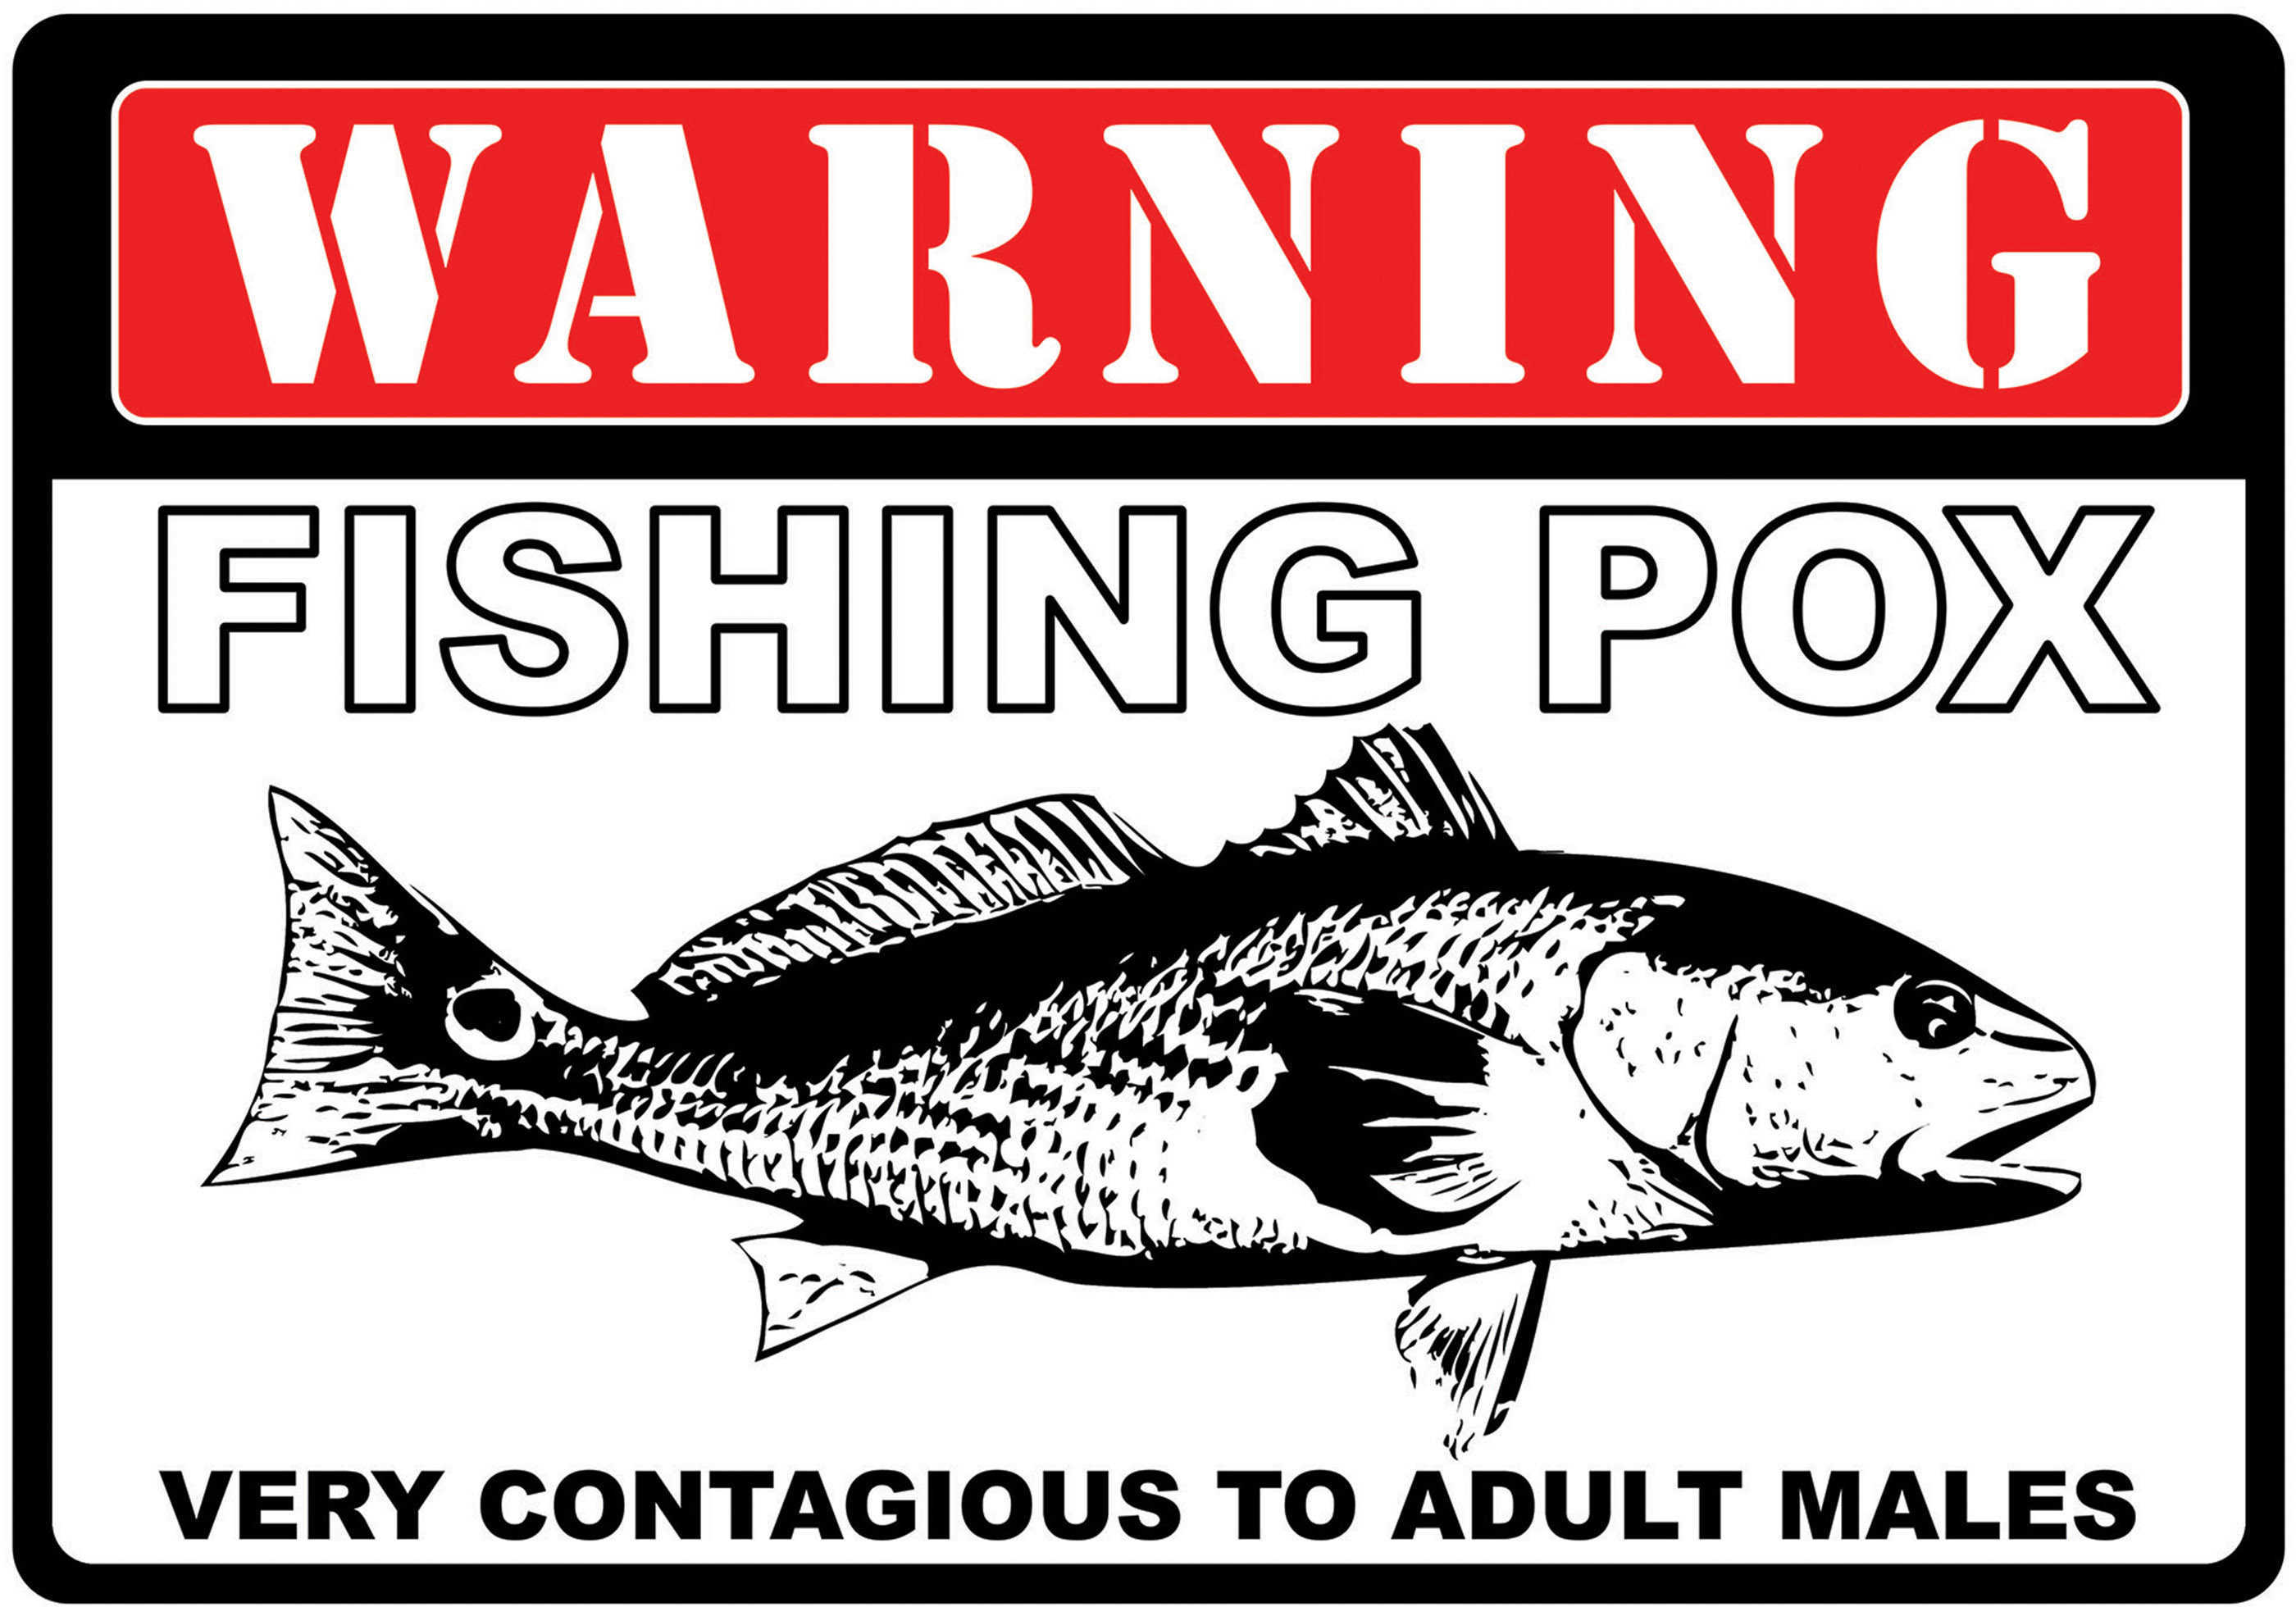 Rivers Edge Products 12" x 17" Tin Sign Warning Fishing Pox Md: 1450